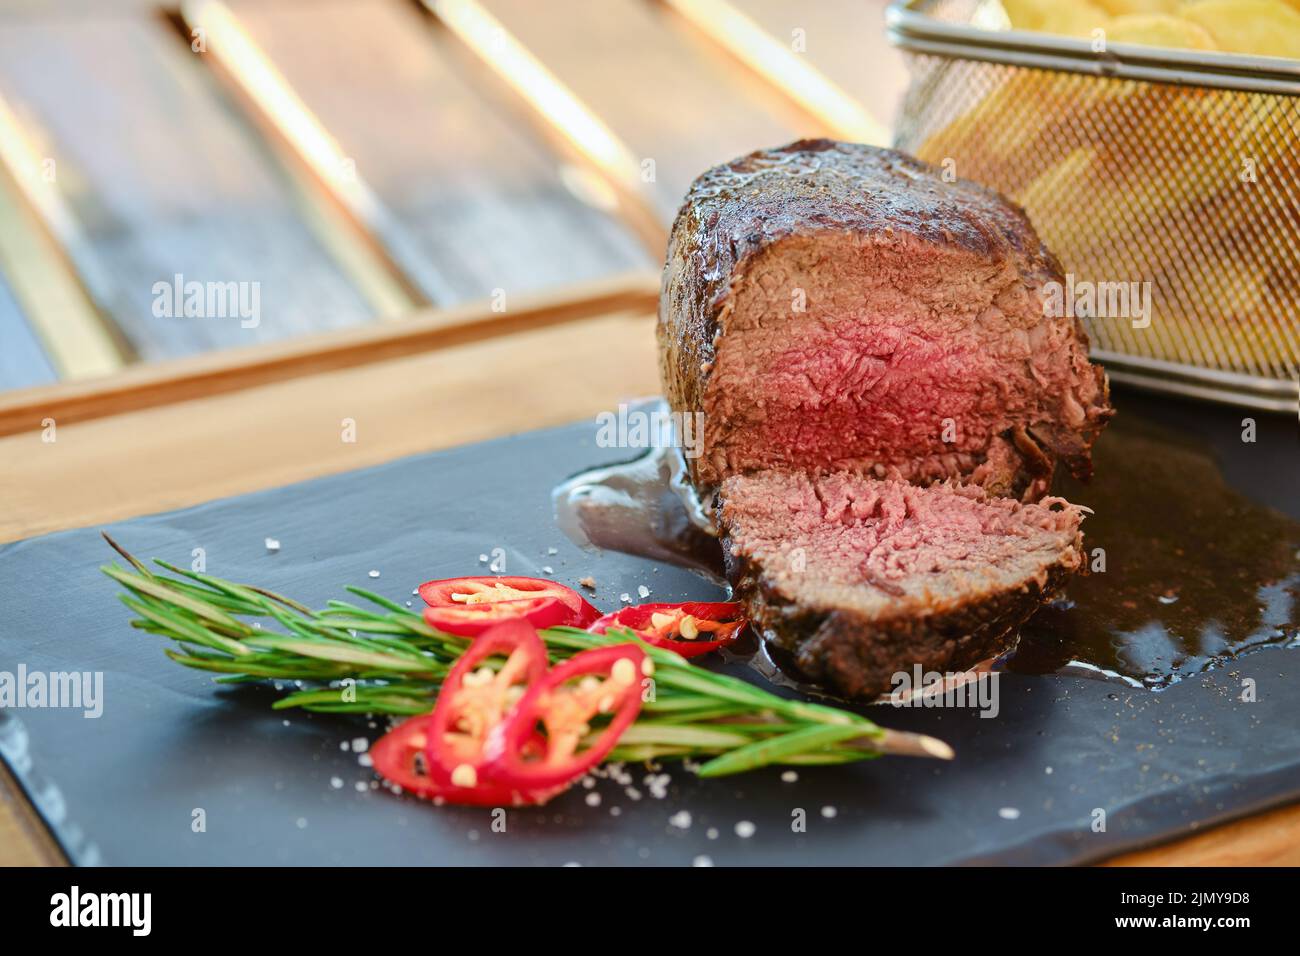 Closeup view of juicy grilled fillet mignon Stock Photo